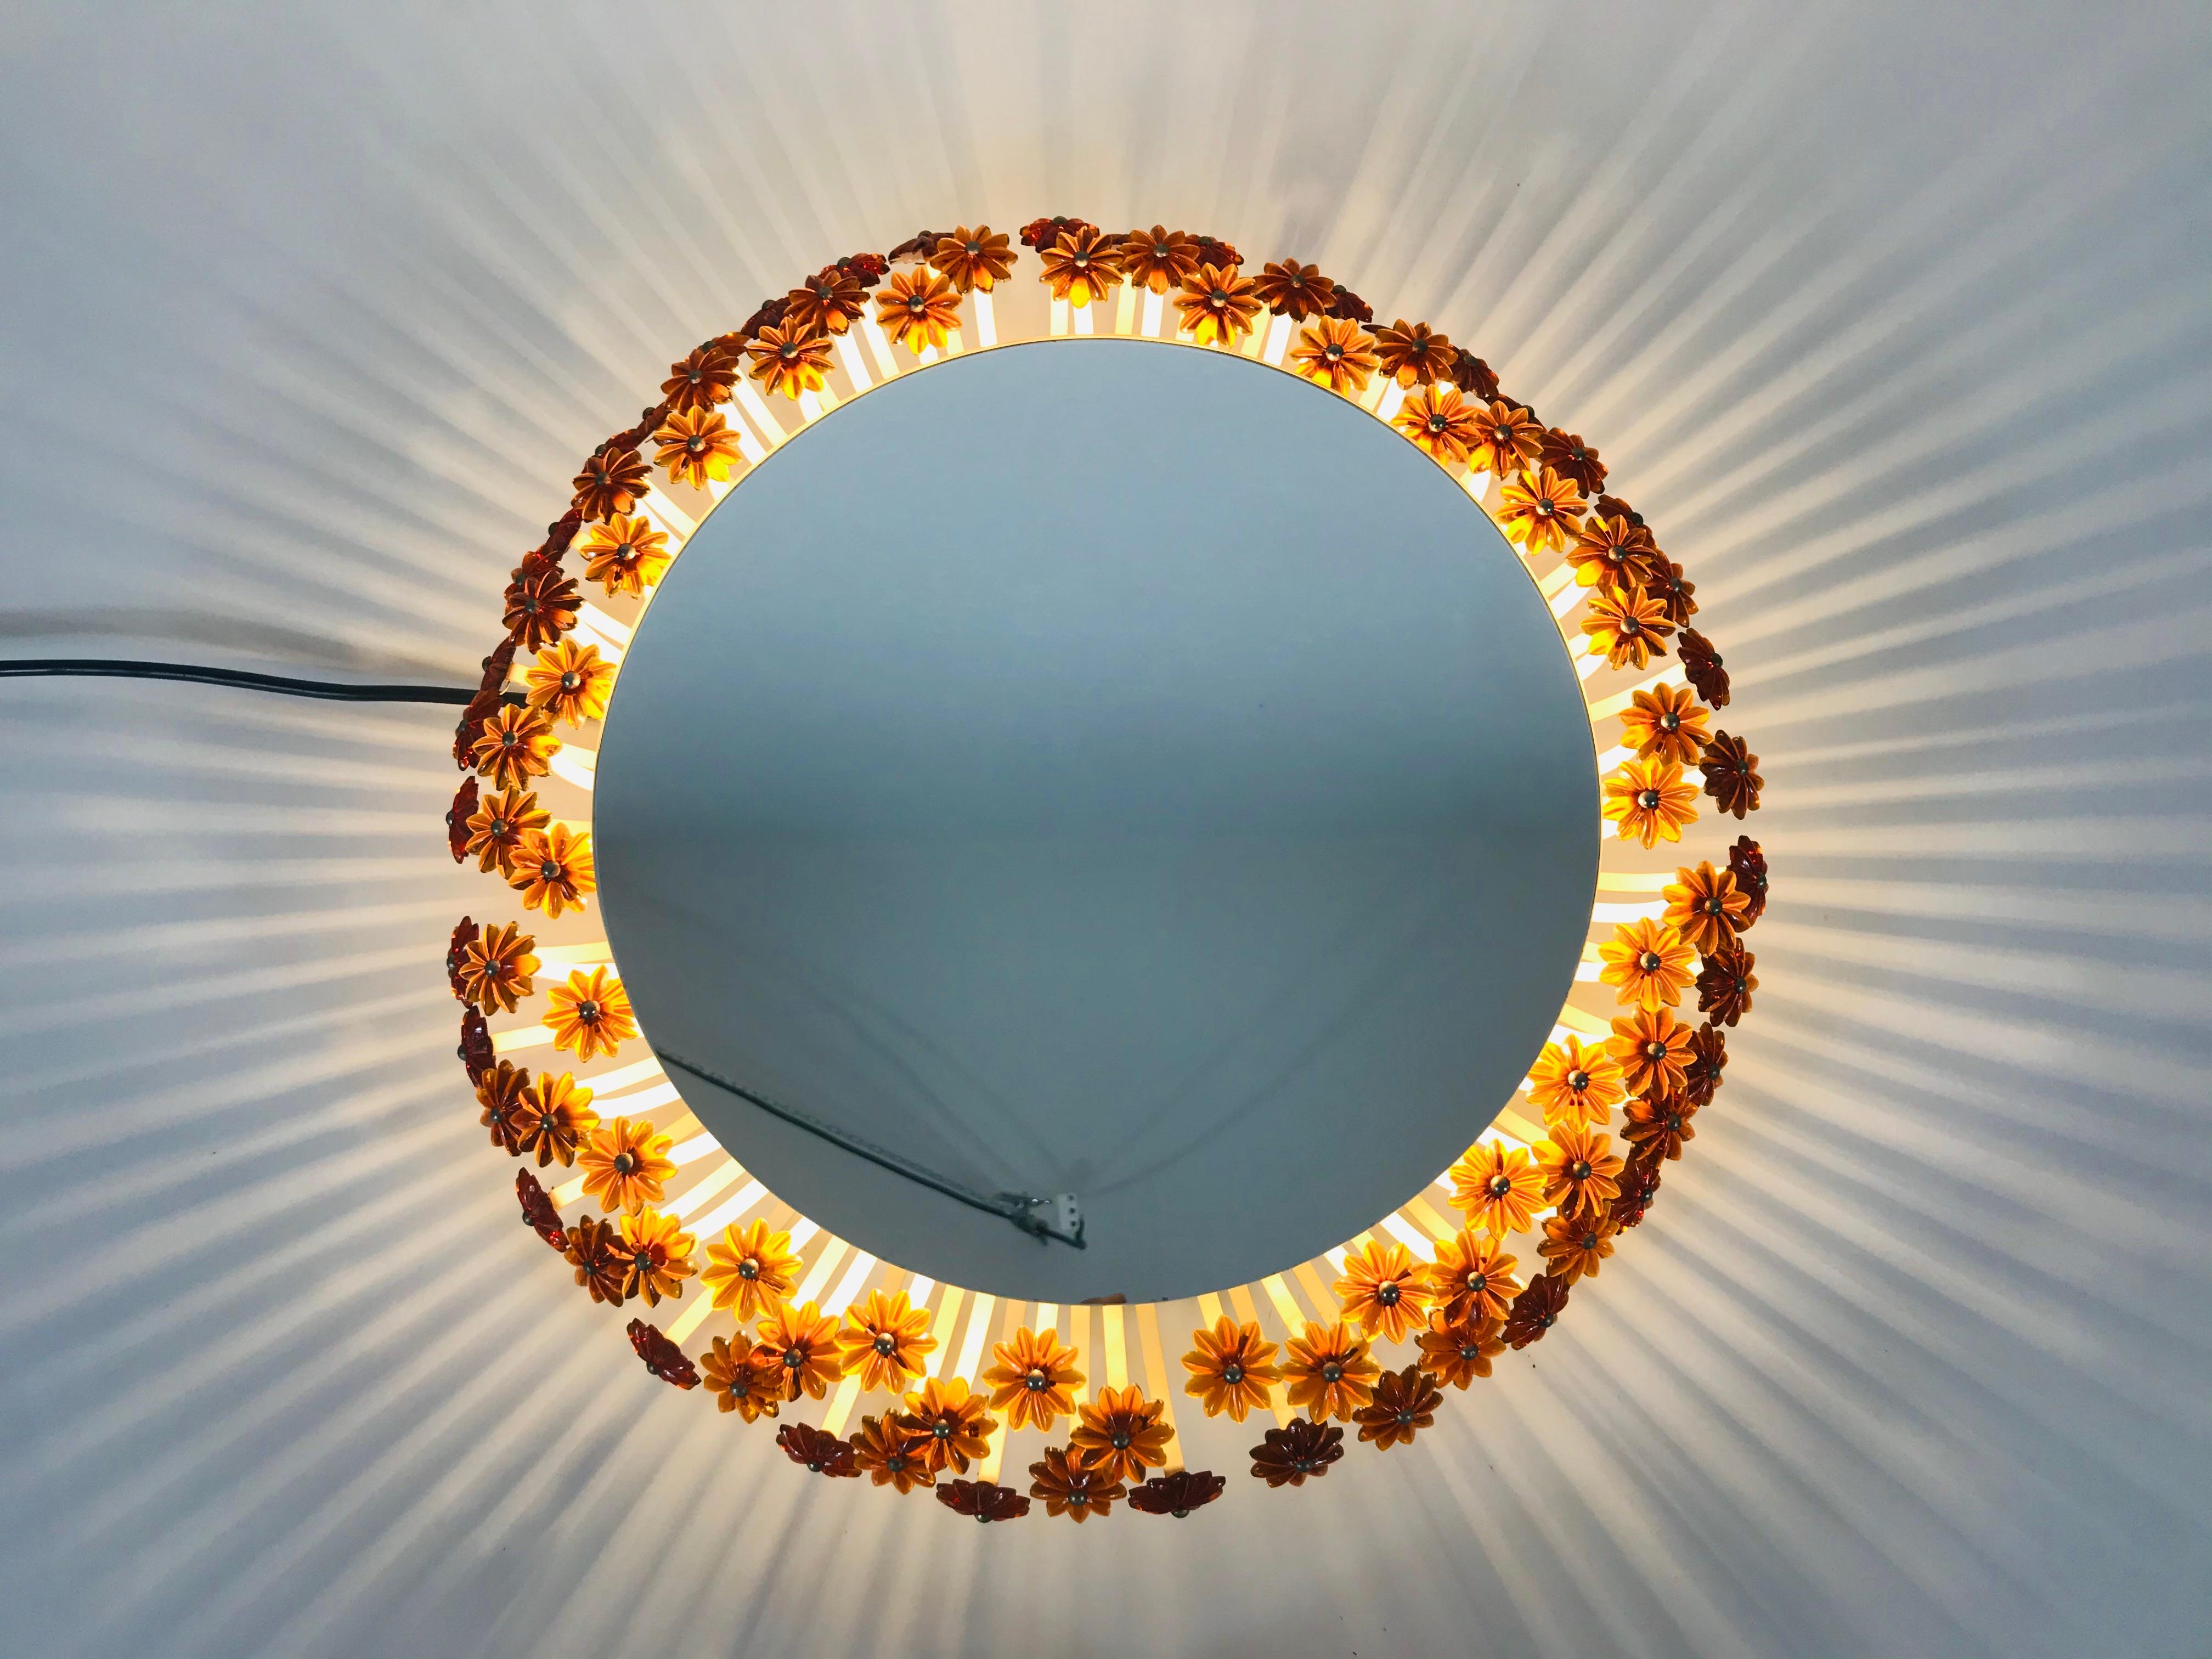 An illuminated wall mirror from the 1960s made in Austria. It was designed by Emil Stejnar for Rupert Nikoll. The mirror has a round design with beautiful orange acrylic flowers. There is one E27 socket inside the frame. The mirror is in a very good